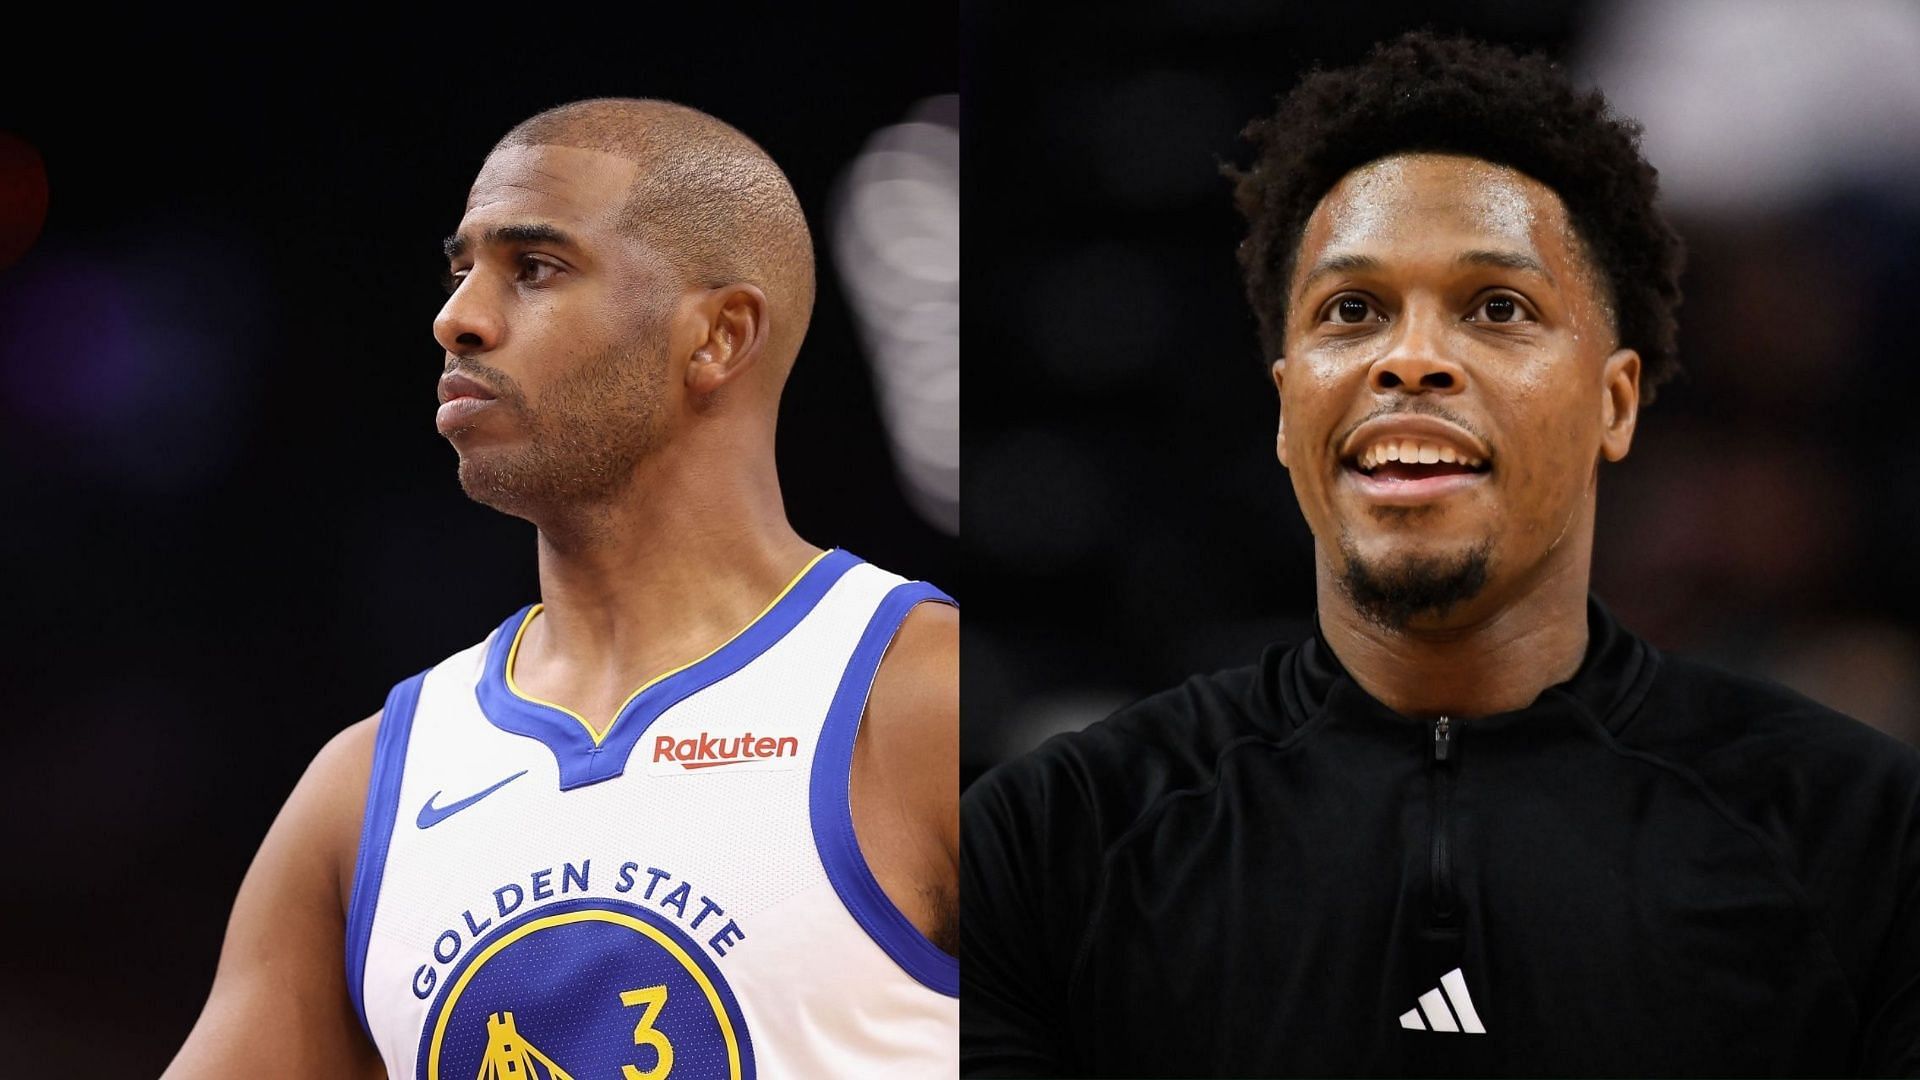 6 NBA players who could retire at the end of this season